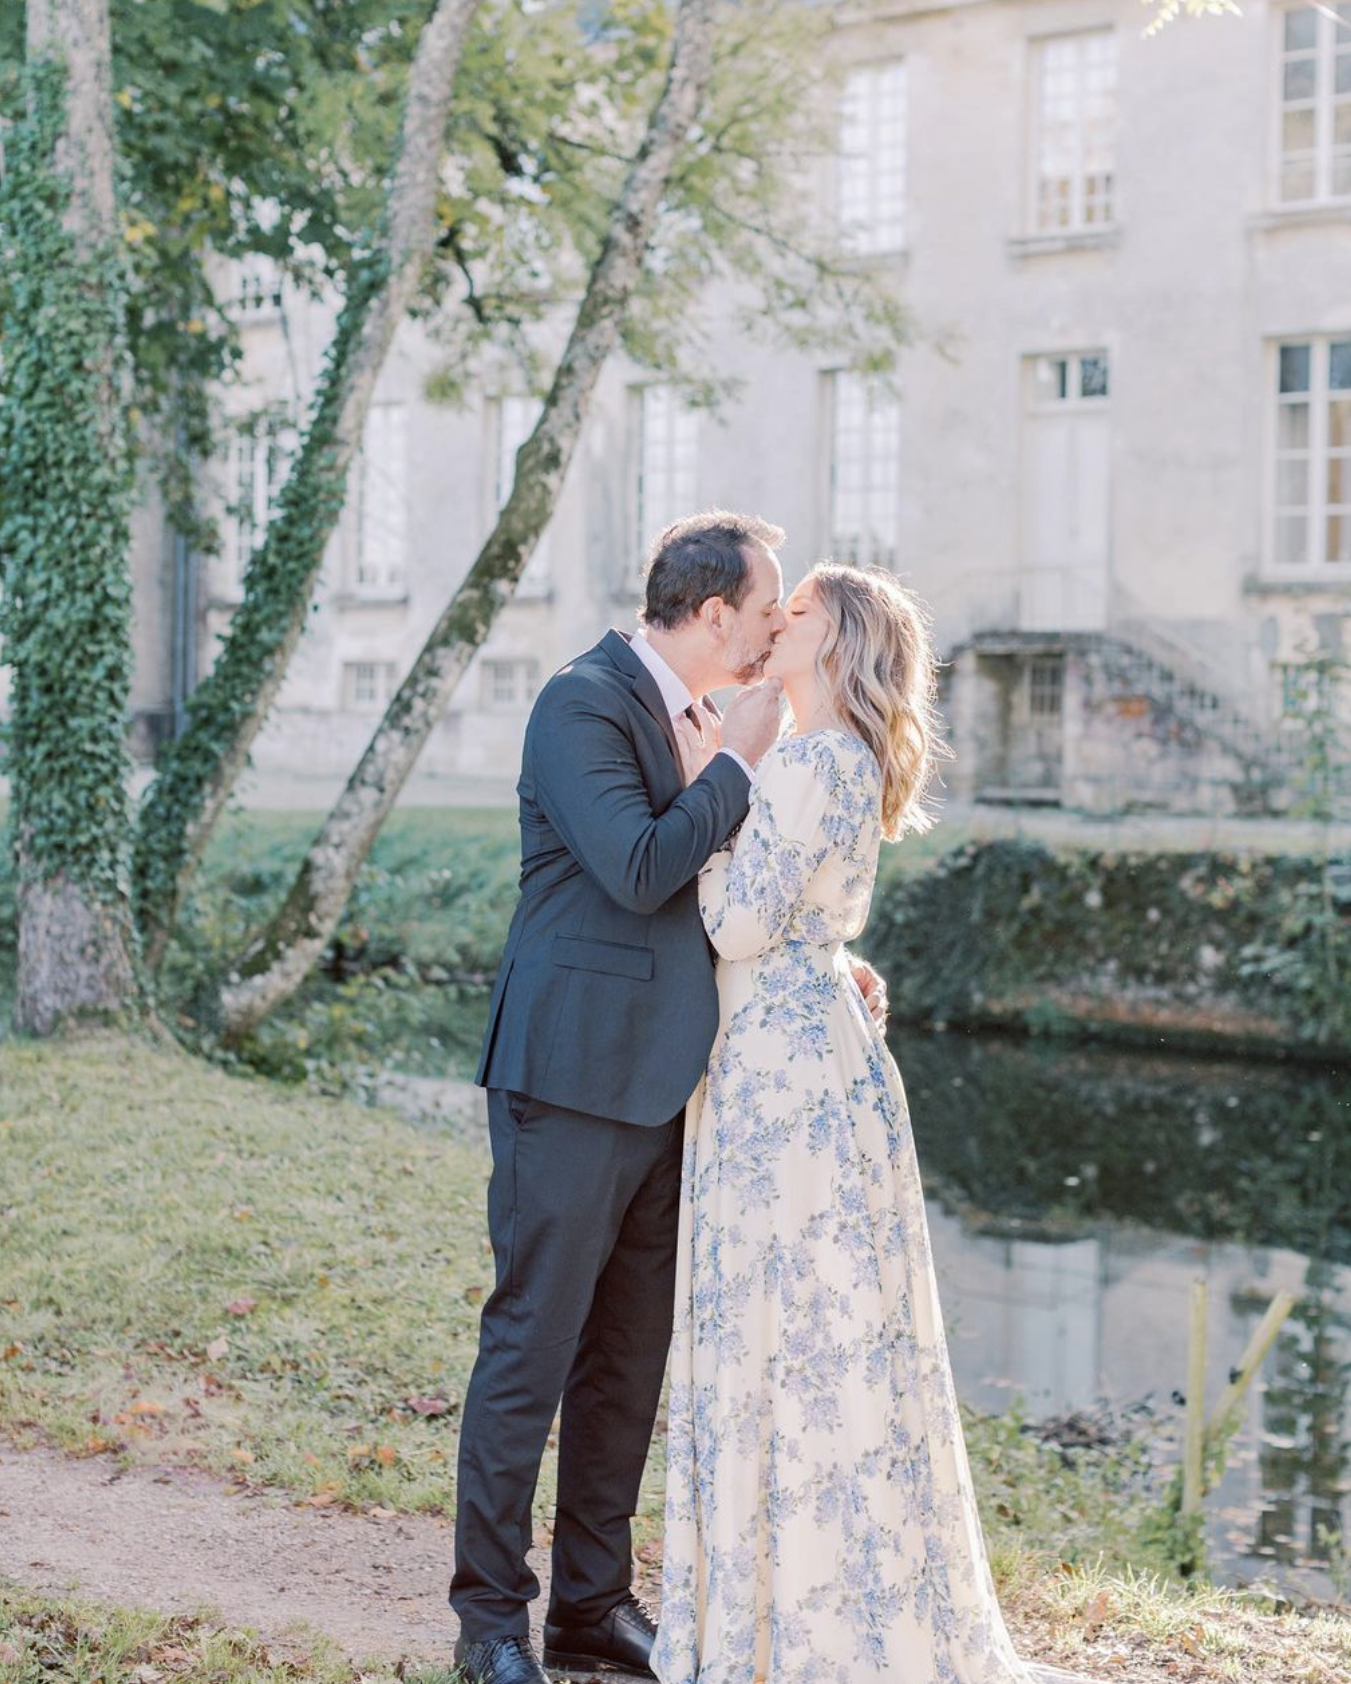 A couple kissing in front of Chateau de Courtomer, a French chateau wedding venue ideal for elopements.